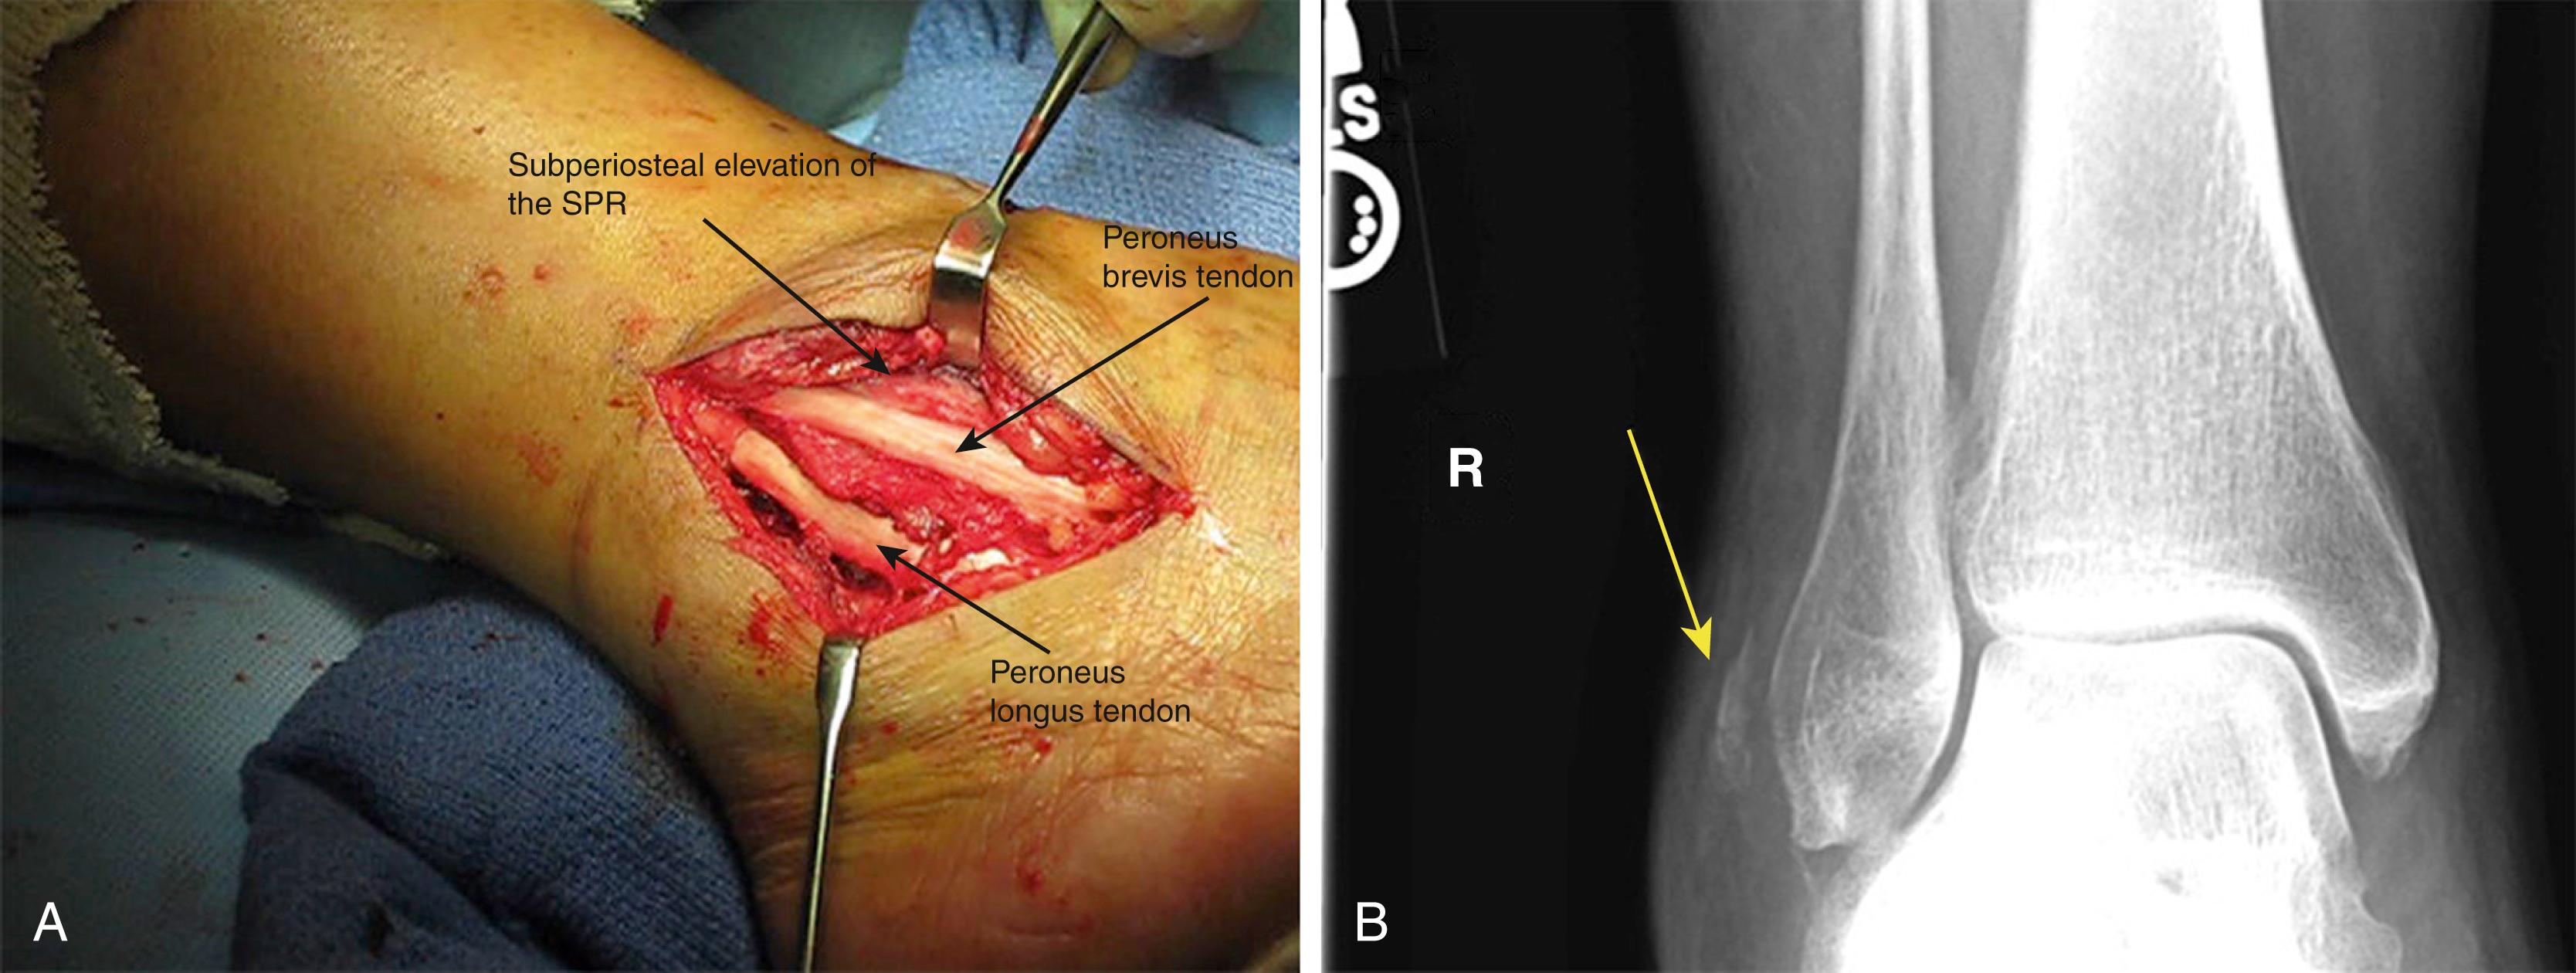 FIG. 188.3, Traumatic peroneal tendon dislocation. (A) Surgical photograph depicting a traumatic dislocation; the superior peroneal retinaculum (SPR) has been disrupted, and the peroneus brevis has dislocated anteriorly out of the retrofibular groove and is lying on the lateral border of the distal fibula. The peroneus longus in this case remained in the retrofibular groove. Close inspection reveals subperiosteal traumatic elevation of the SPR (grade 1). (B) Fleck sign ( yellow arrow ), pathognomonic of an acute Peroneal tendon dislocation, grade 3.